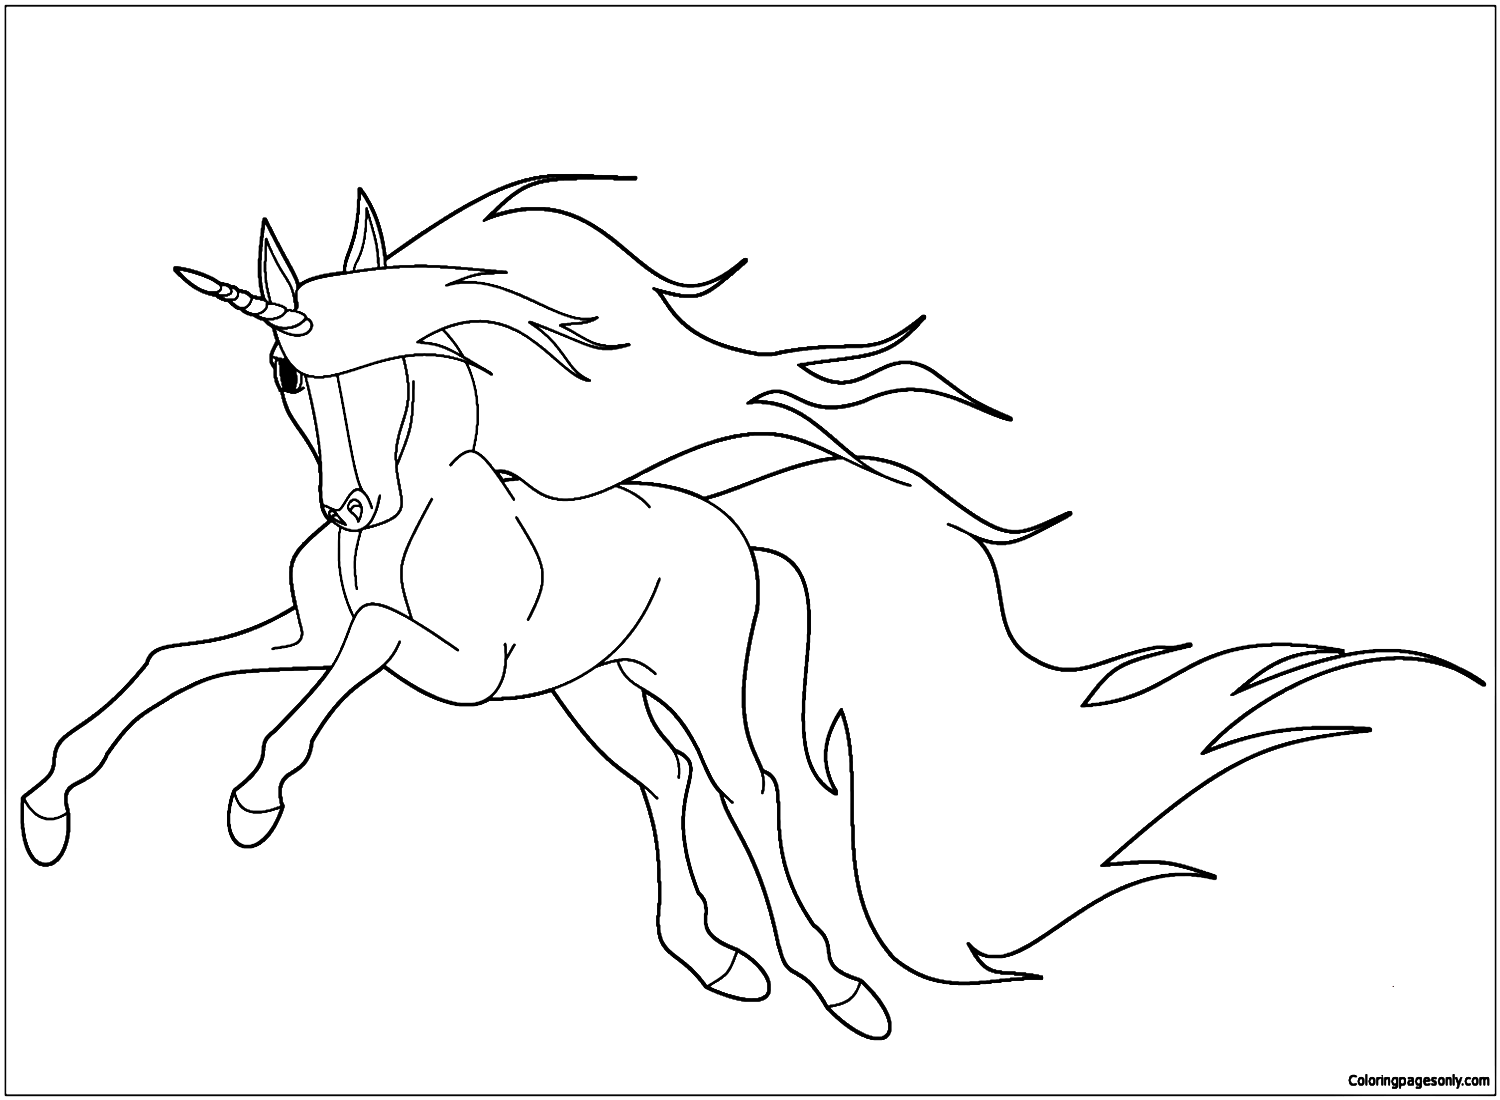 Running Unicorn Coloring Page